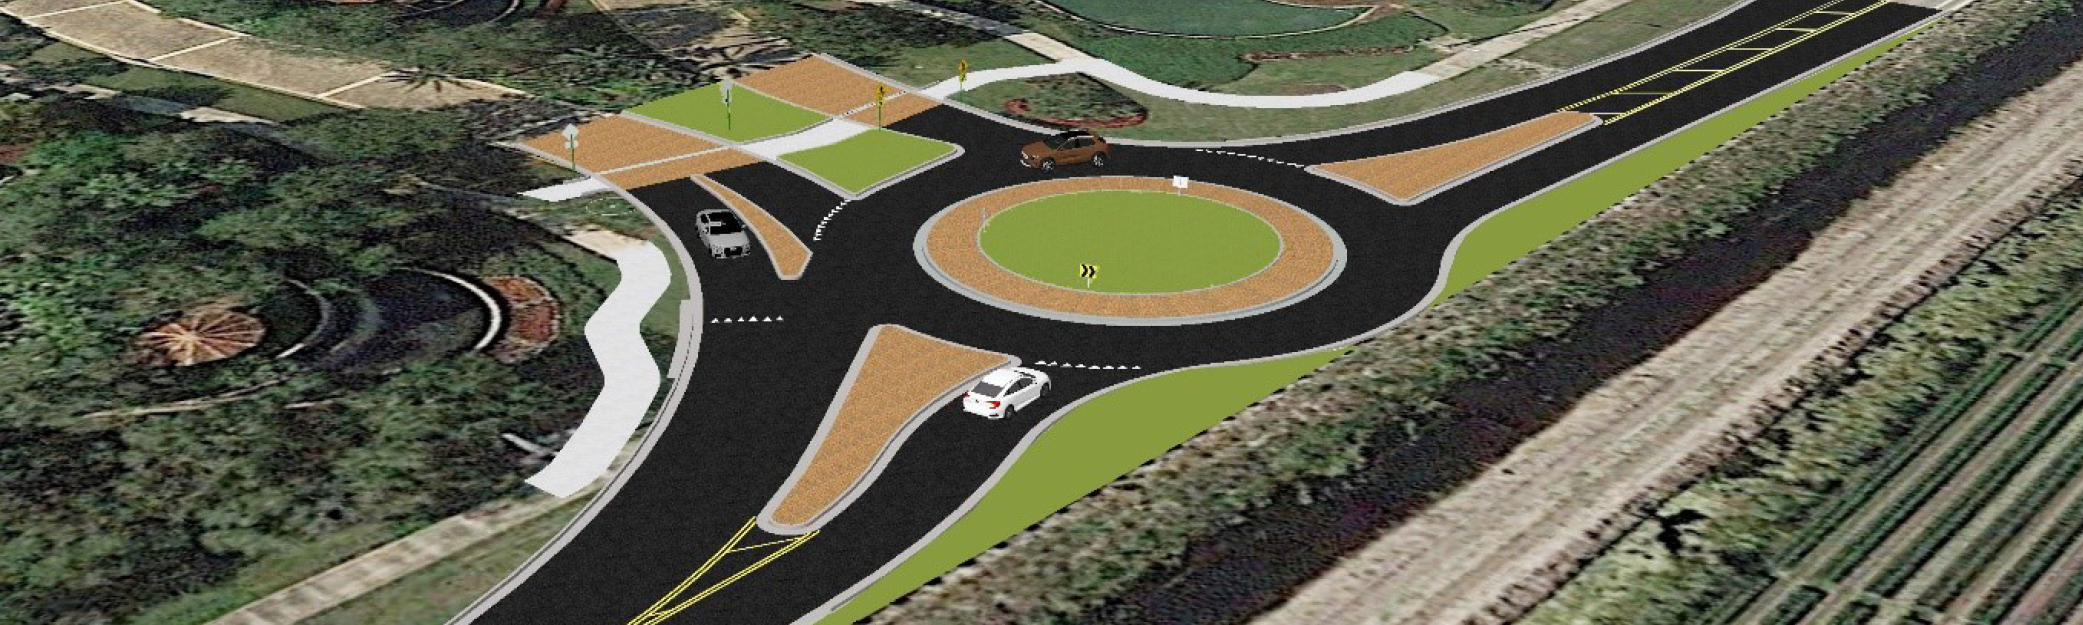 Public Involvement Key to Success of City of Parkland Roundabout Project  